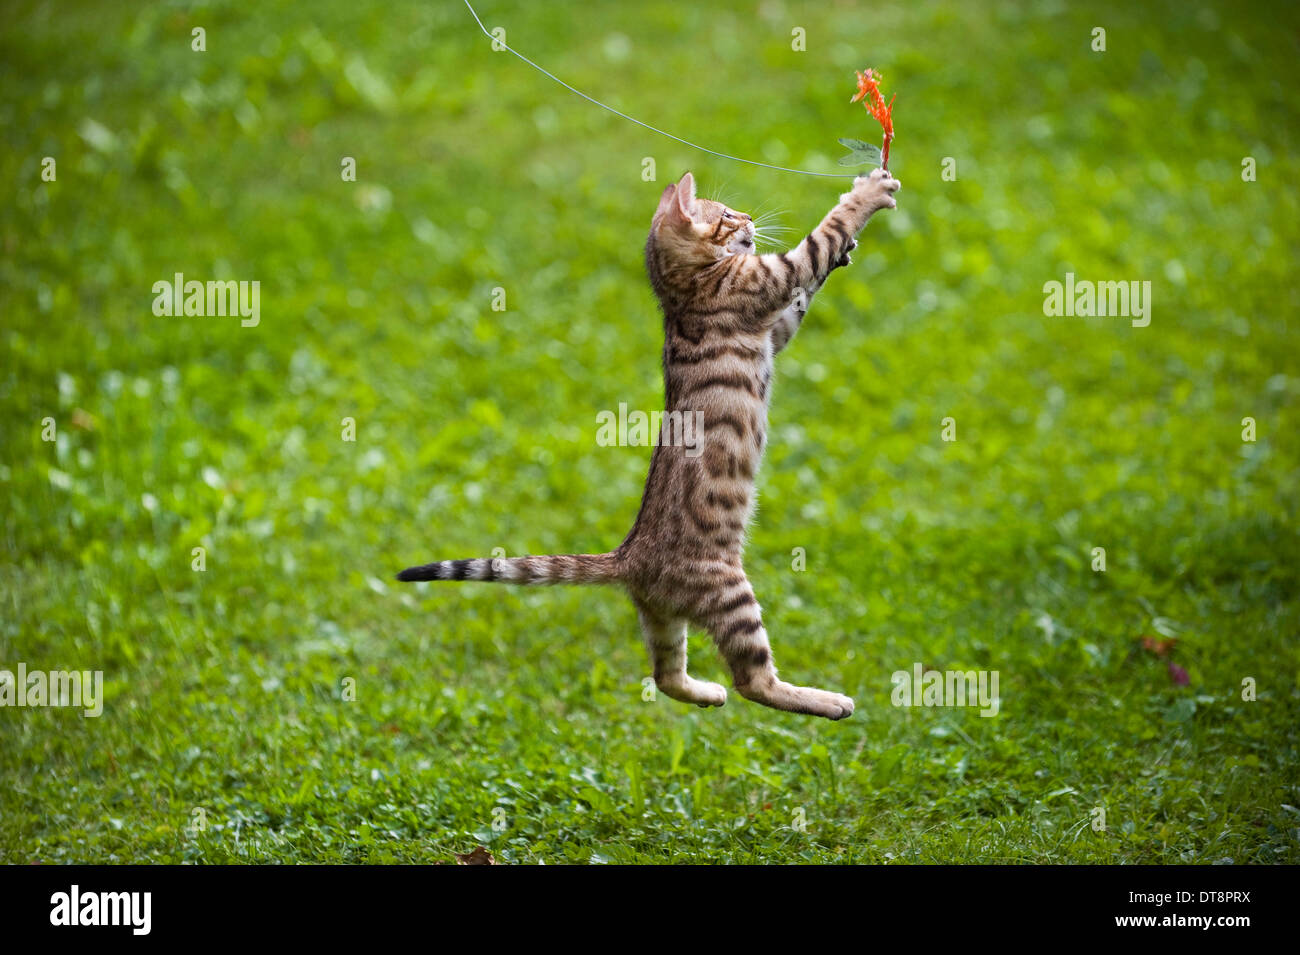 Bengal Cat Kitten (10 weeks old, rosetted pattern) on a lawn, jumping for feather toy Stock Photo